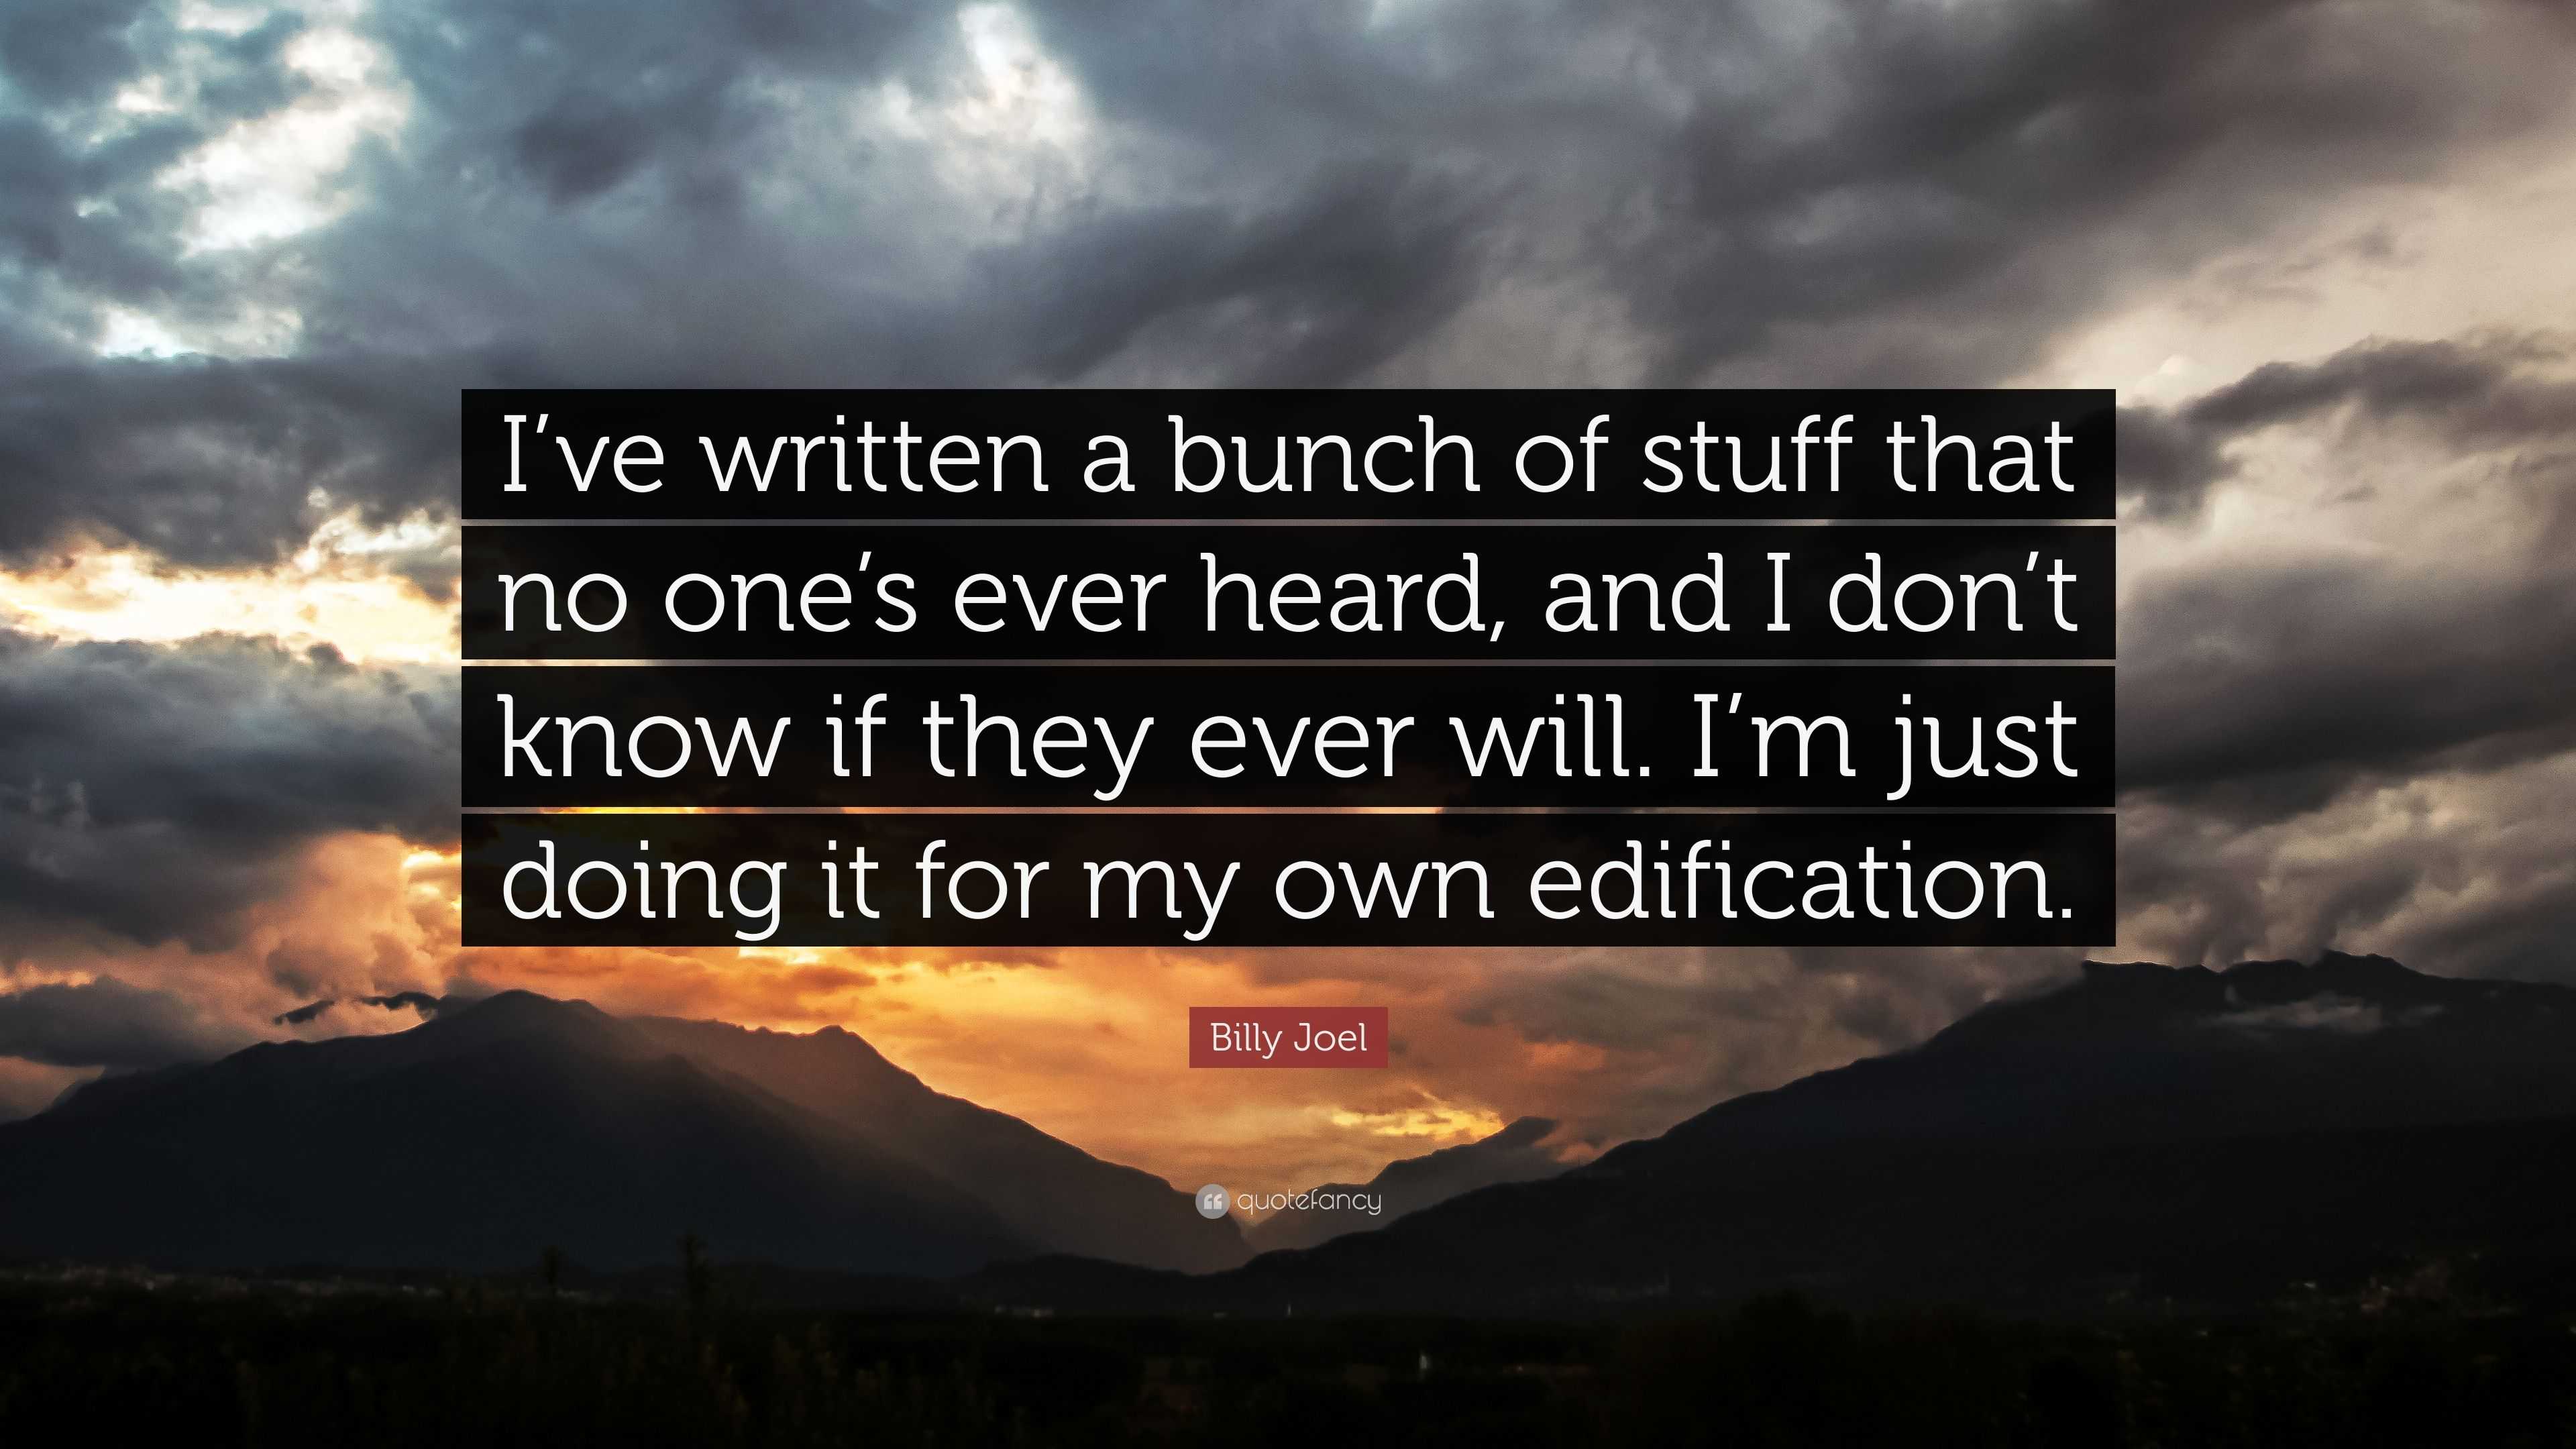 Billy Joel Quote: “I've written a bunch of stuff that no one's